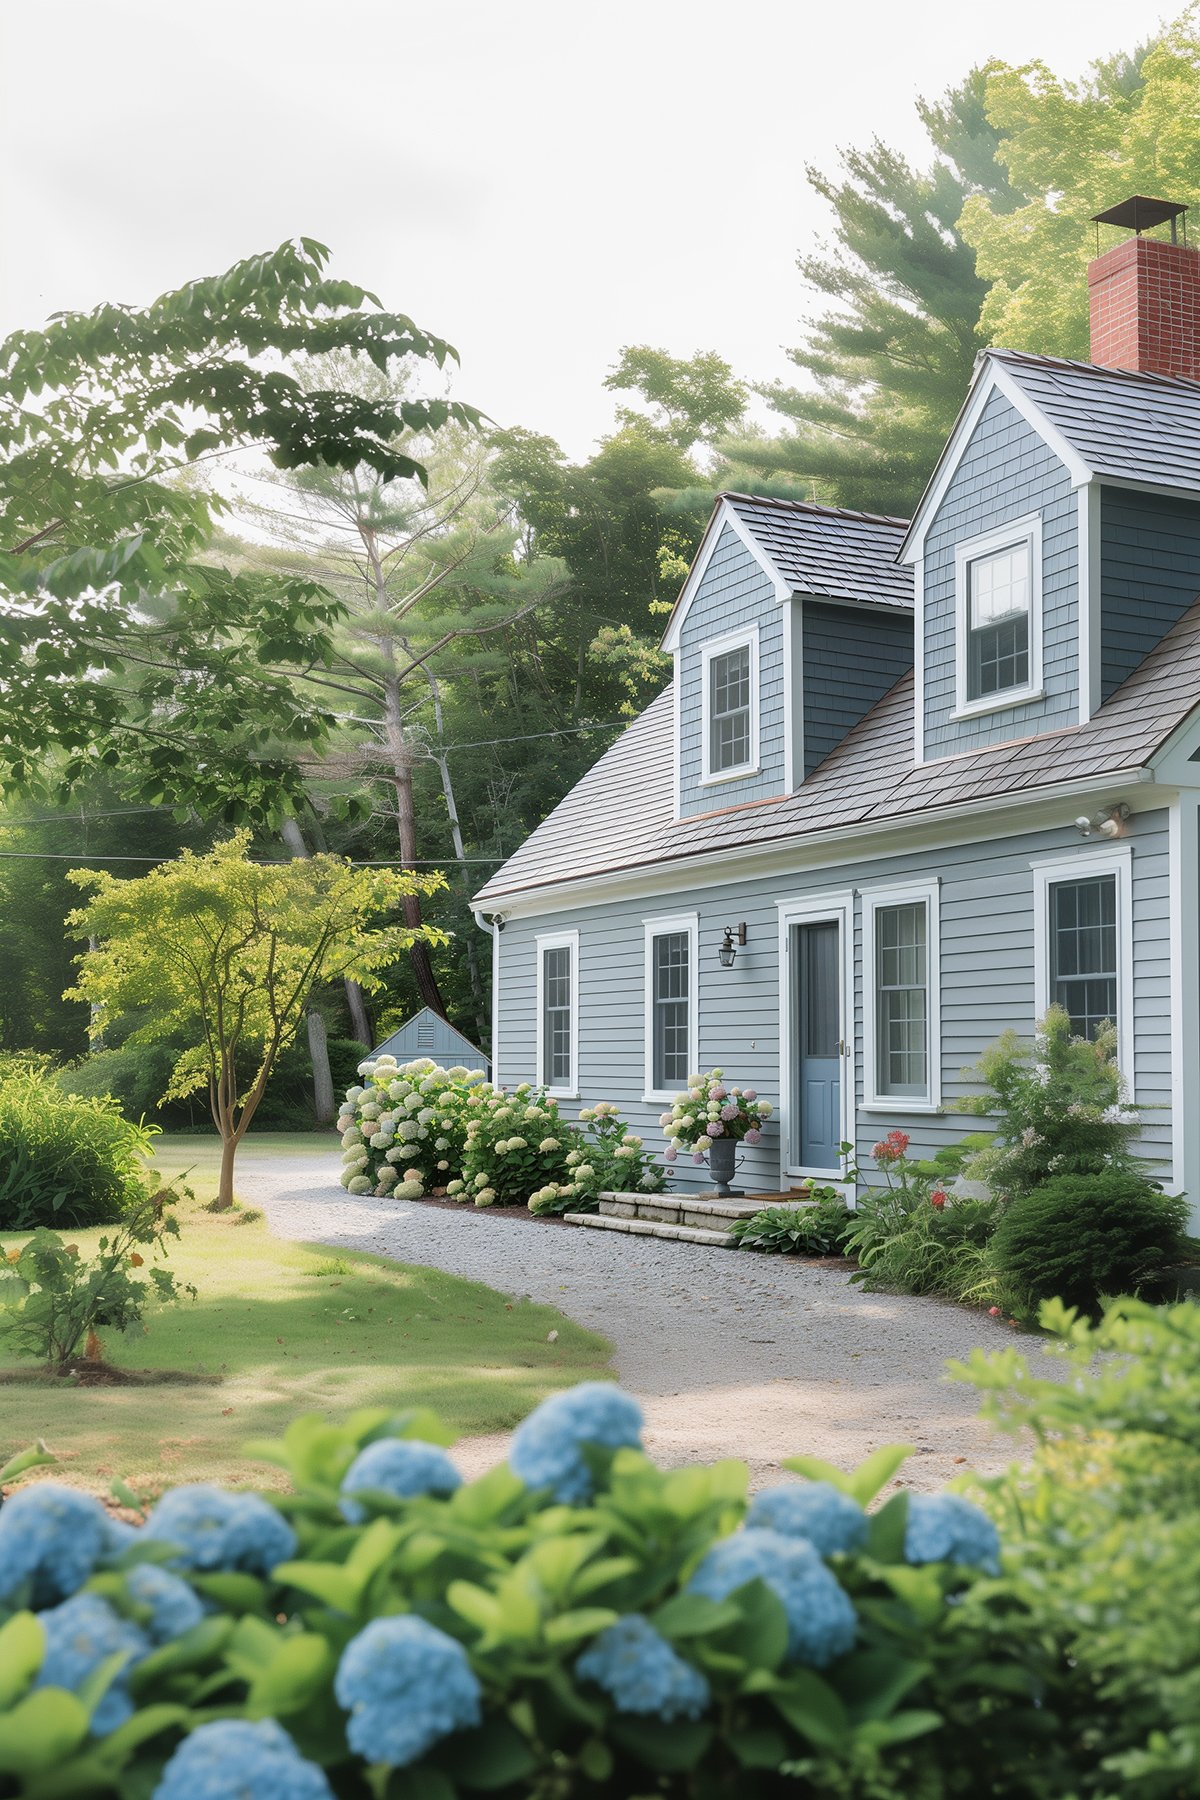 Classic dormered Cape Cod style house painted Benjamin Moore Boothbay Gray.